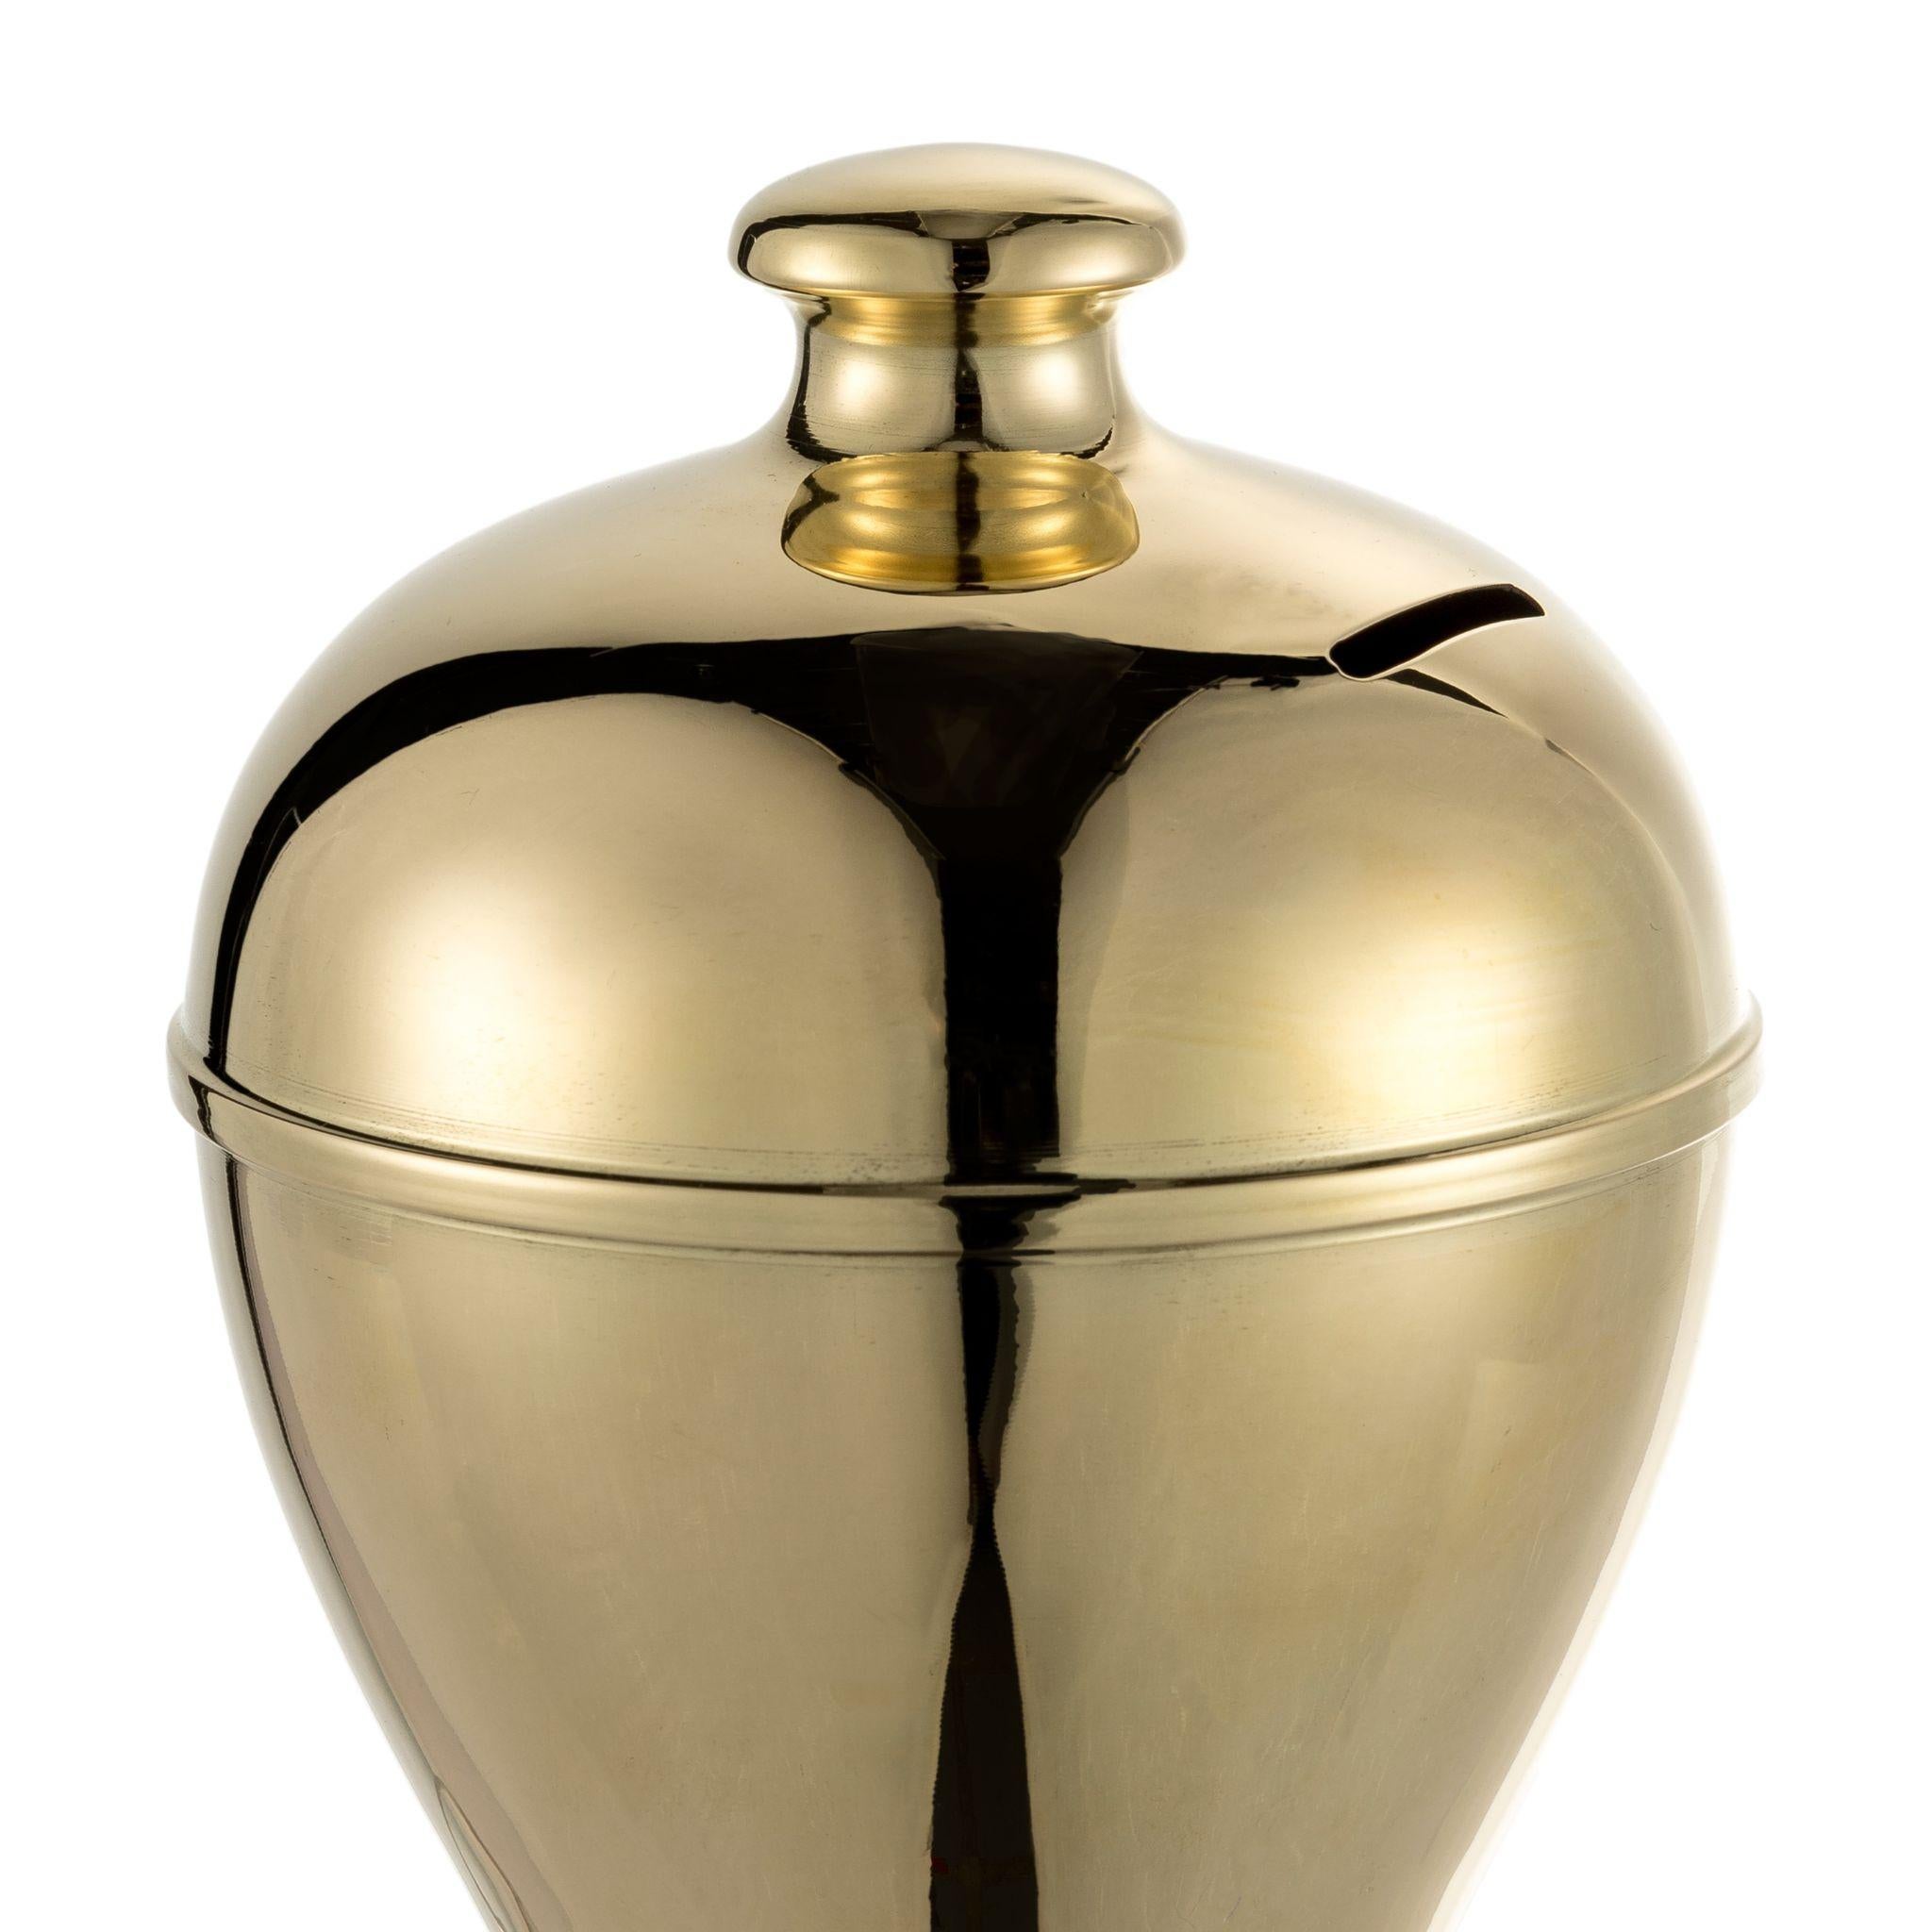 Keep your money safe and stylish with our brass piggy bank. Its charming design and high-quality construction make it a great addition to any home decor. Shop now and start saving in style.